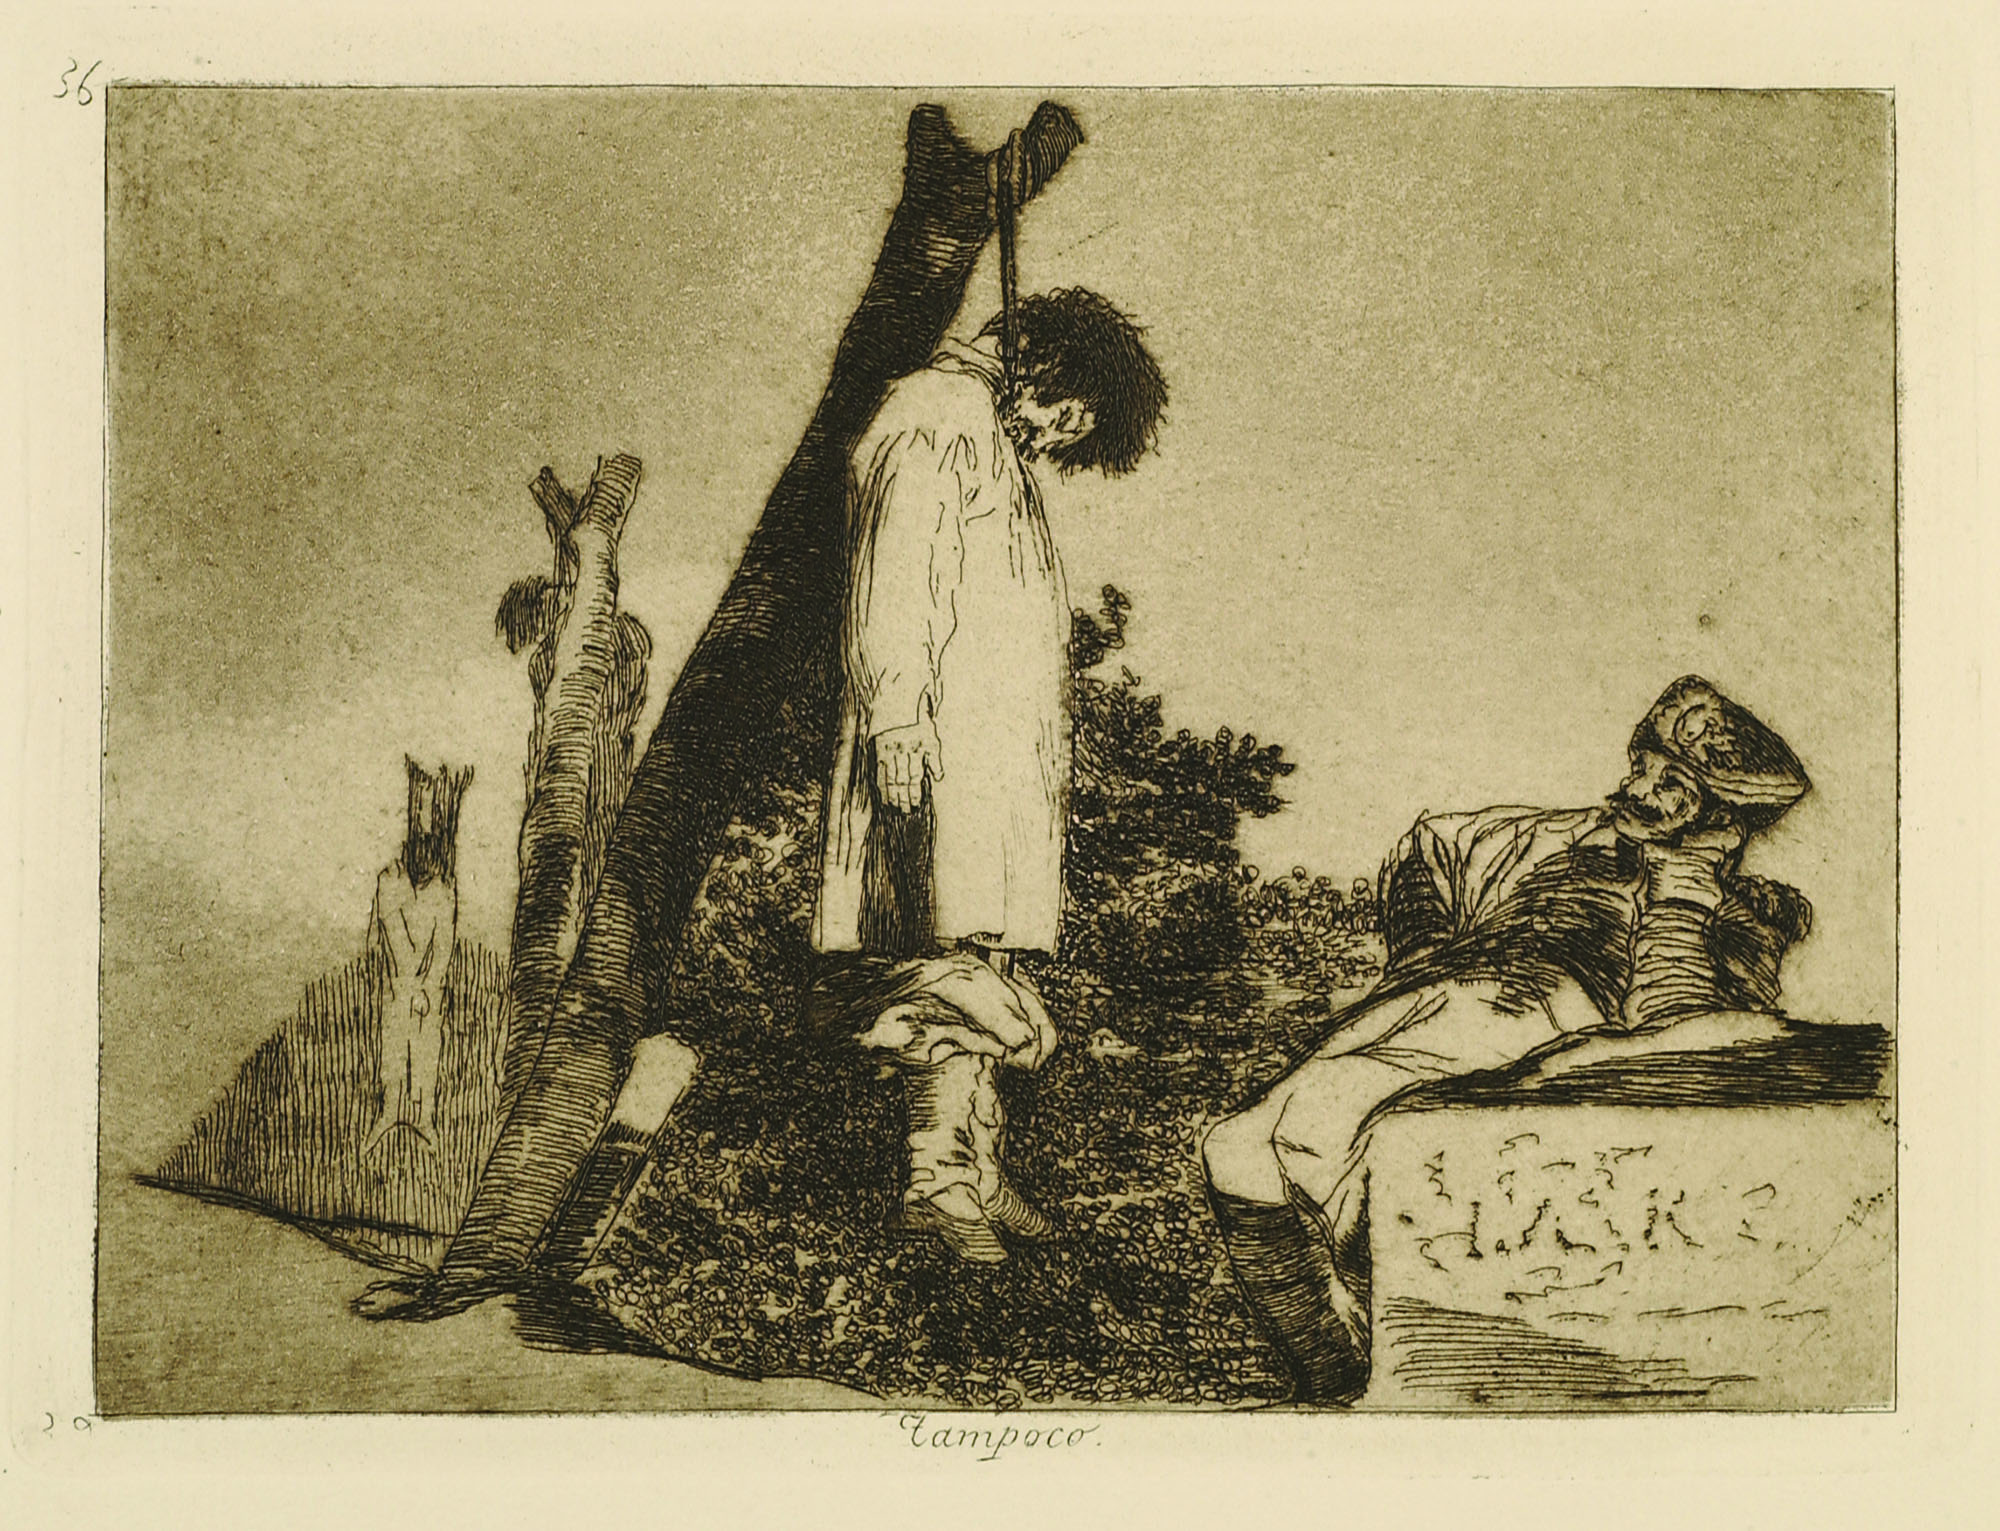 Francisco de Goya y Lucientes, Tampoco (Not [in this case] either), from the series “The Disasters of War,”  ca. 1820 (1863 1st ed.). Sixth edition printed in the Calcografía nacional for the Royal Academy of San Fernando in 1930. Etching, burnished aquatint, and drypoint on laid Arches paper. Courtesy of the Grinnell College Art Collection, Gift of Helena Percas de Ponseti and Ignacio V. Ponseti.